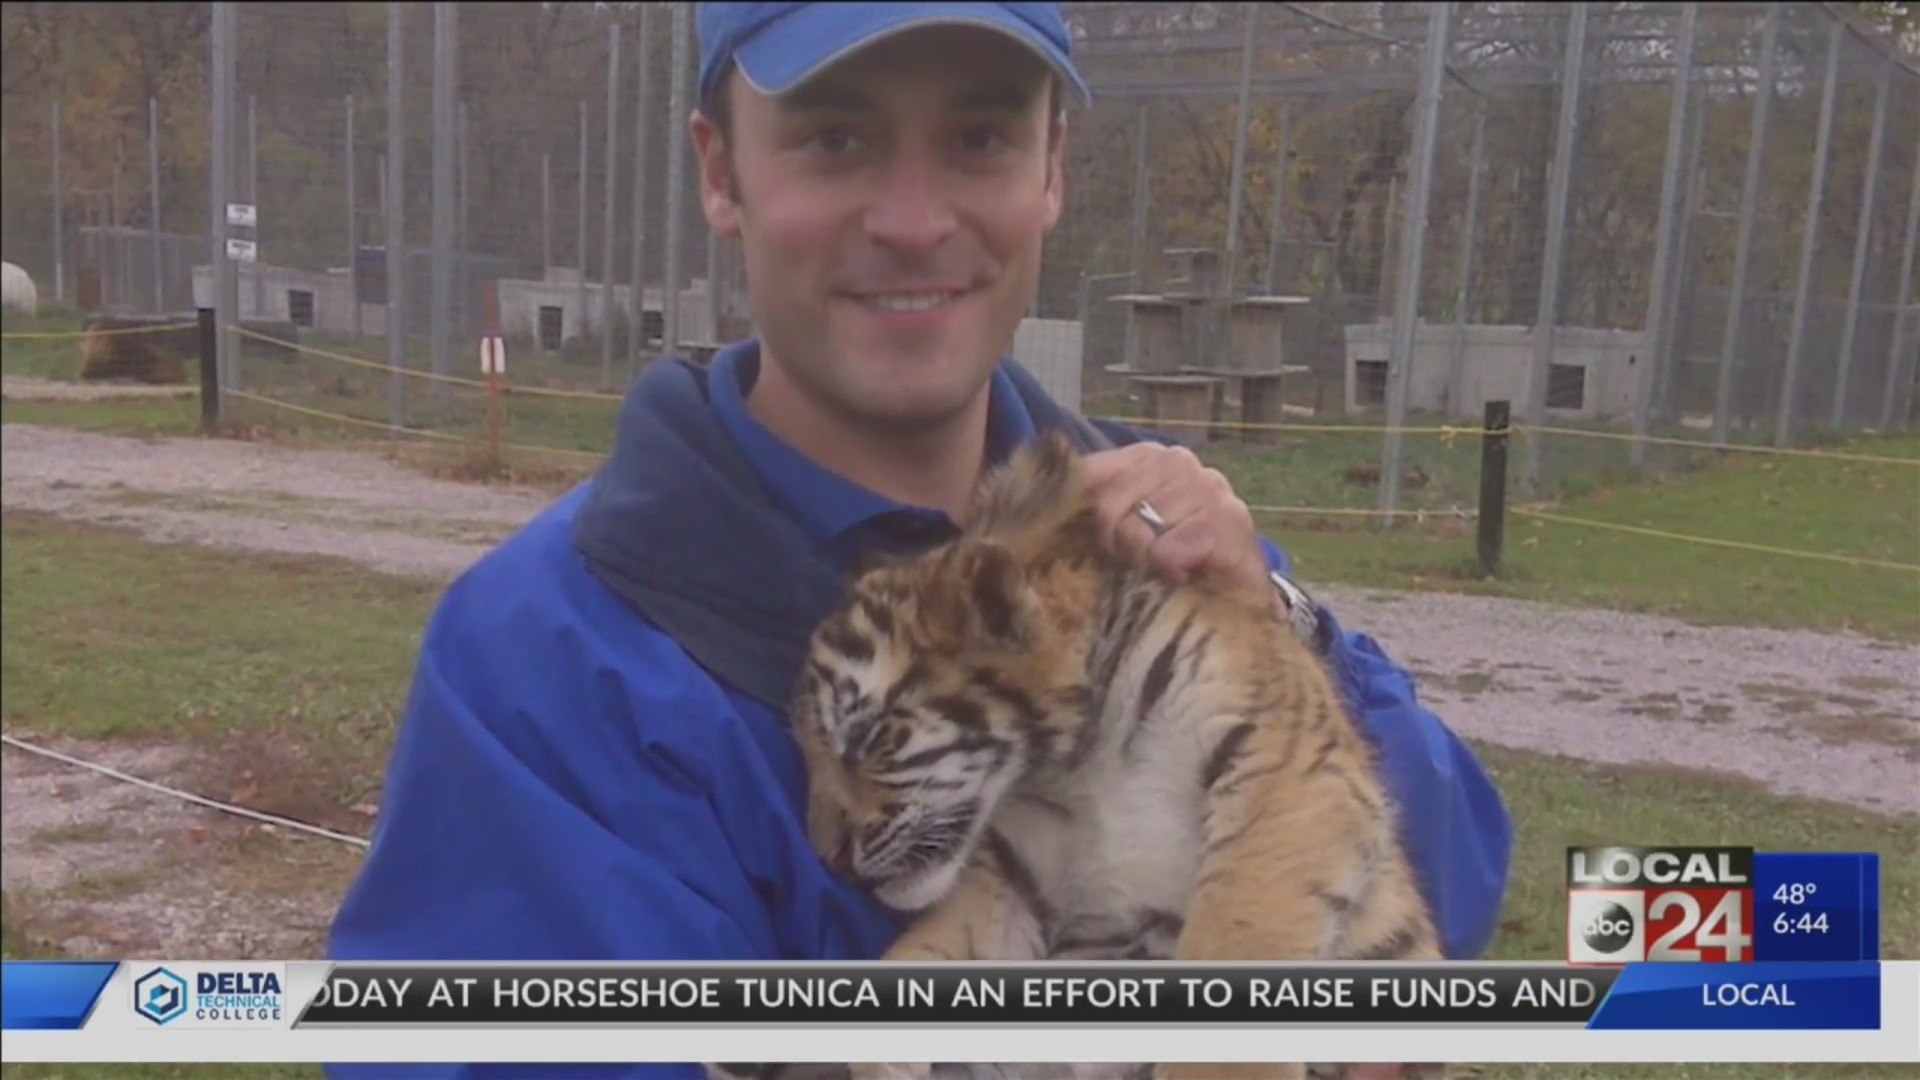 TOM III, famed tiger mascot for the UofM, passes away